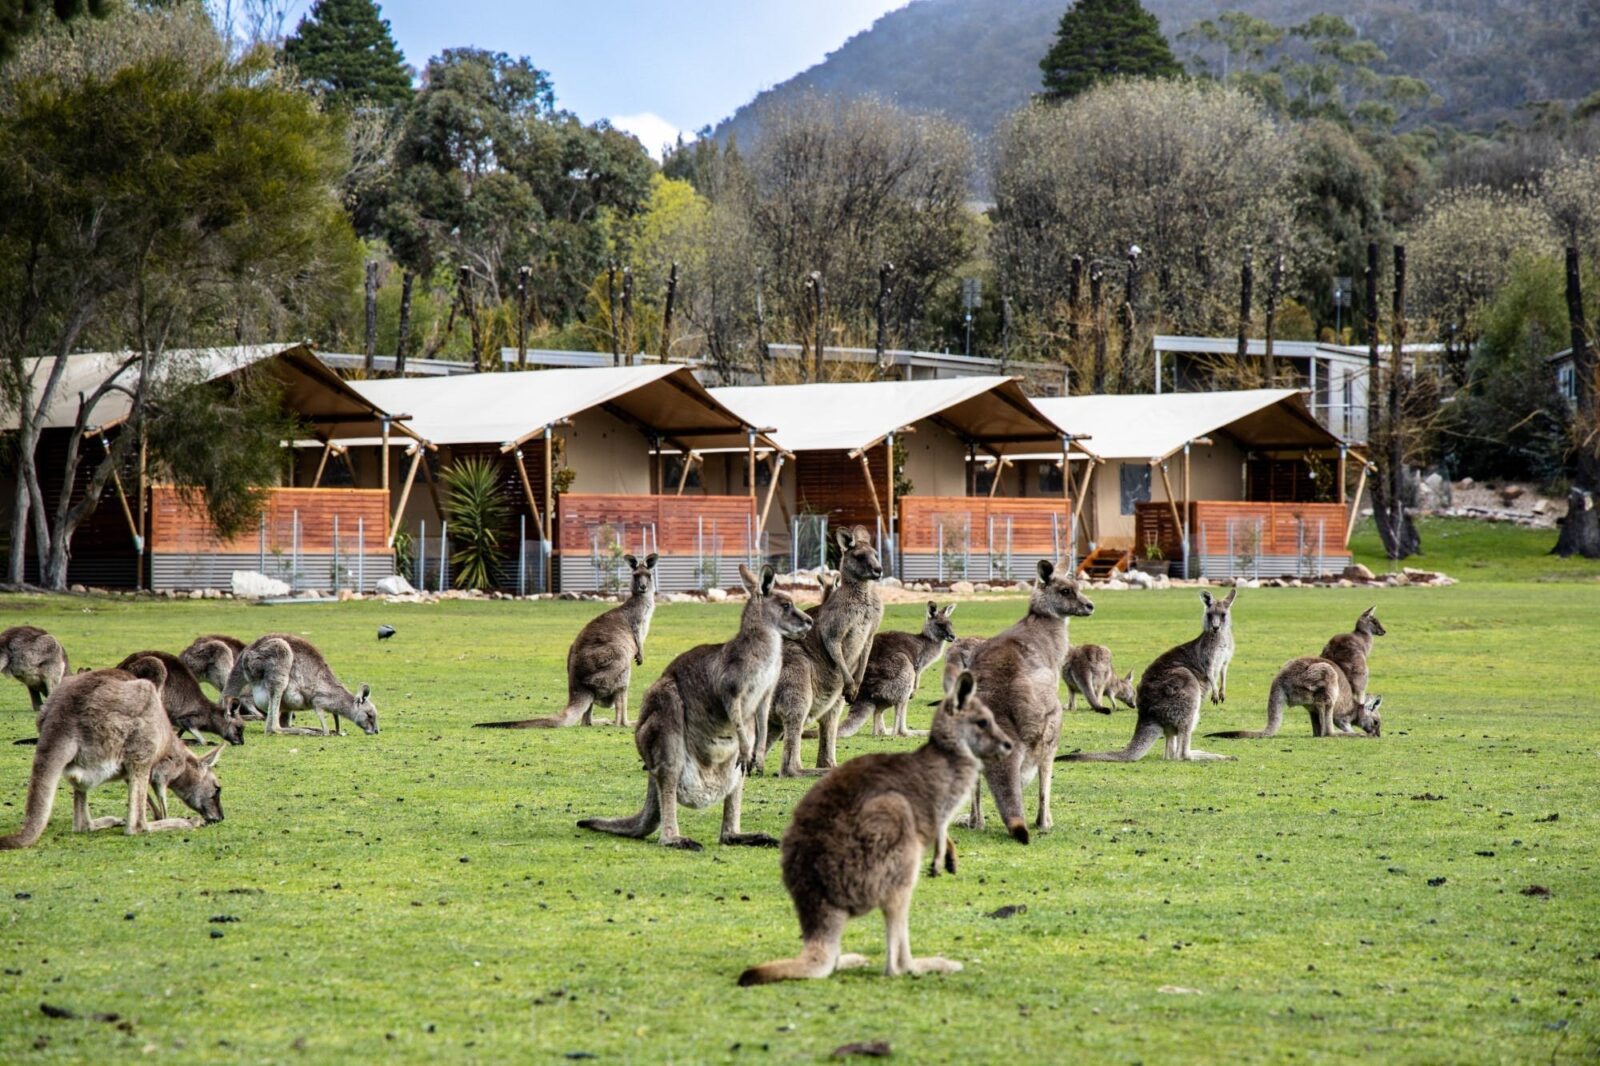 Mop of kangaroos sitting in front of glamping tents on grass valley floor